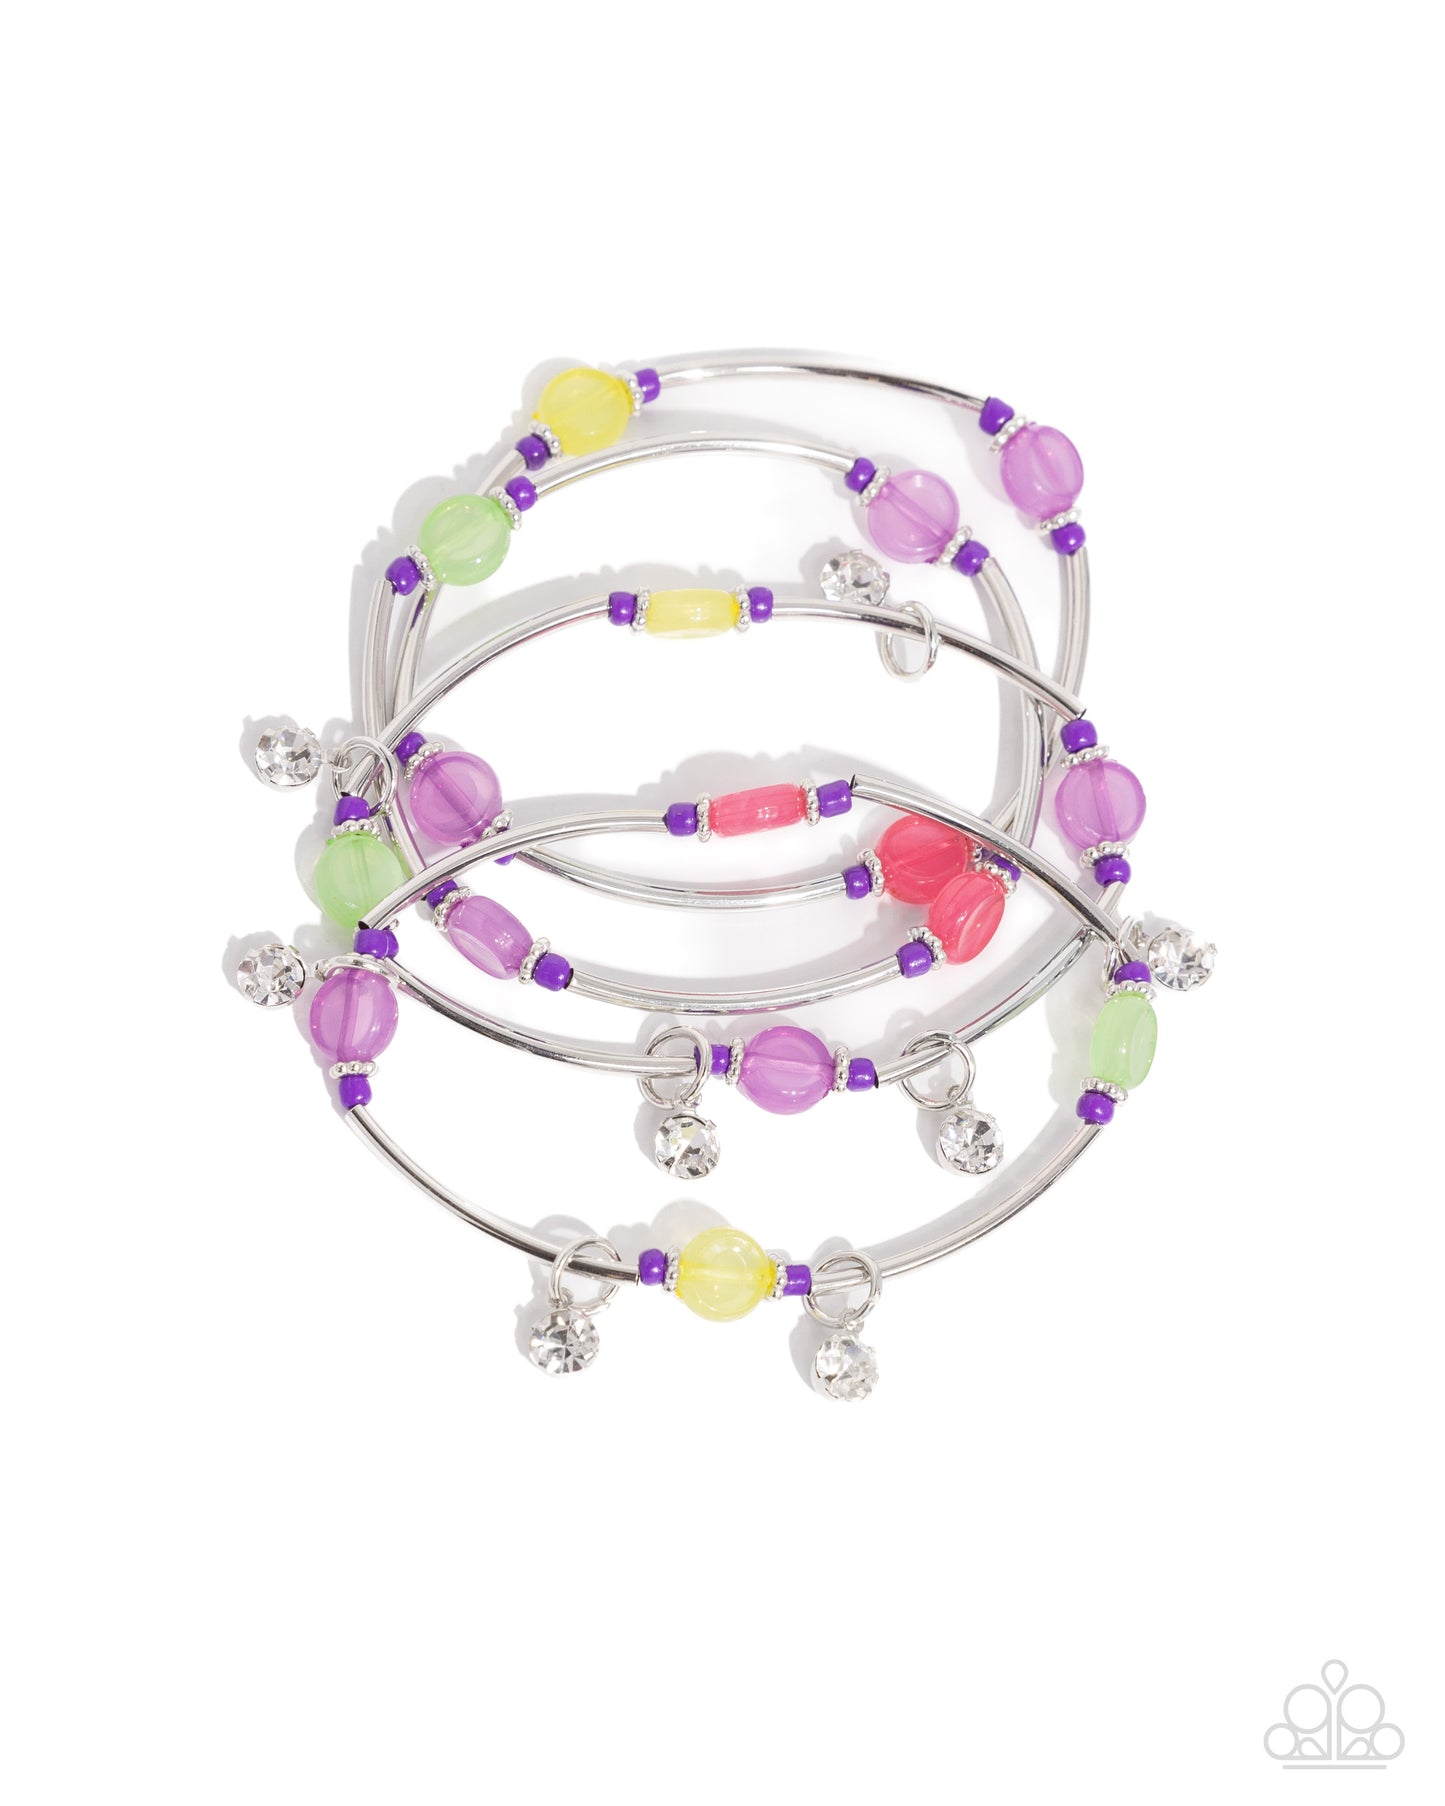 <p>Infused along stretchy bands, a collection of flexible silver rods, purple seed beads, and silver floral beads loop around the wrist, creating a scintillating stack. A collection of clear Lemon Drop, apple green, purple, and Pink Peacock acrylic beads, and dangling solitaire white rhinestones add further color and interest to the design.</p> <p><i> Sold as one set of four bracelets.</i></p>